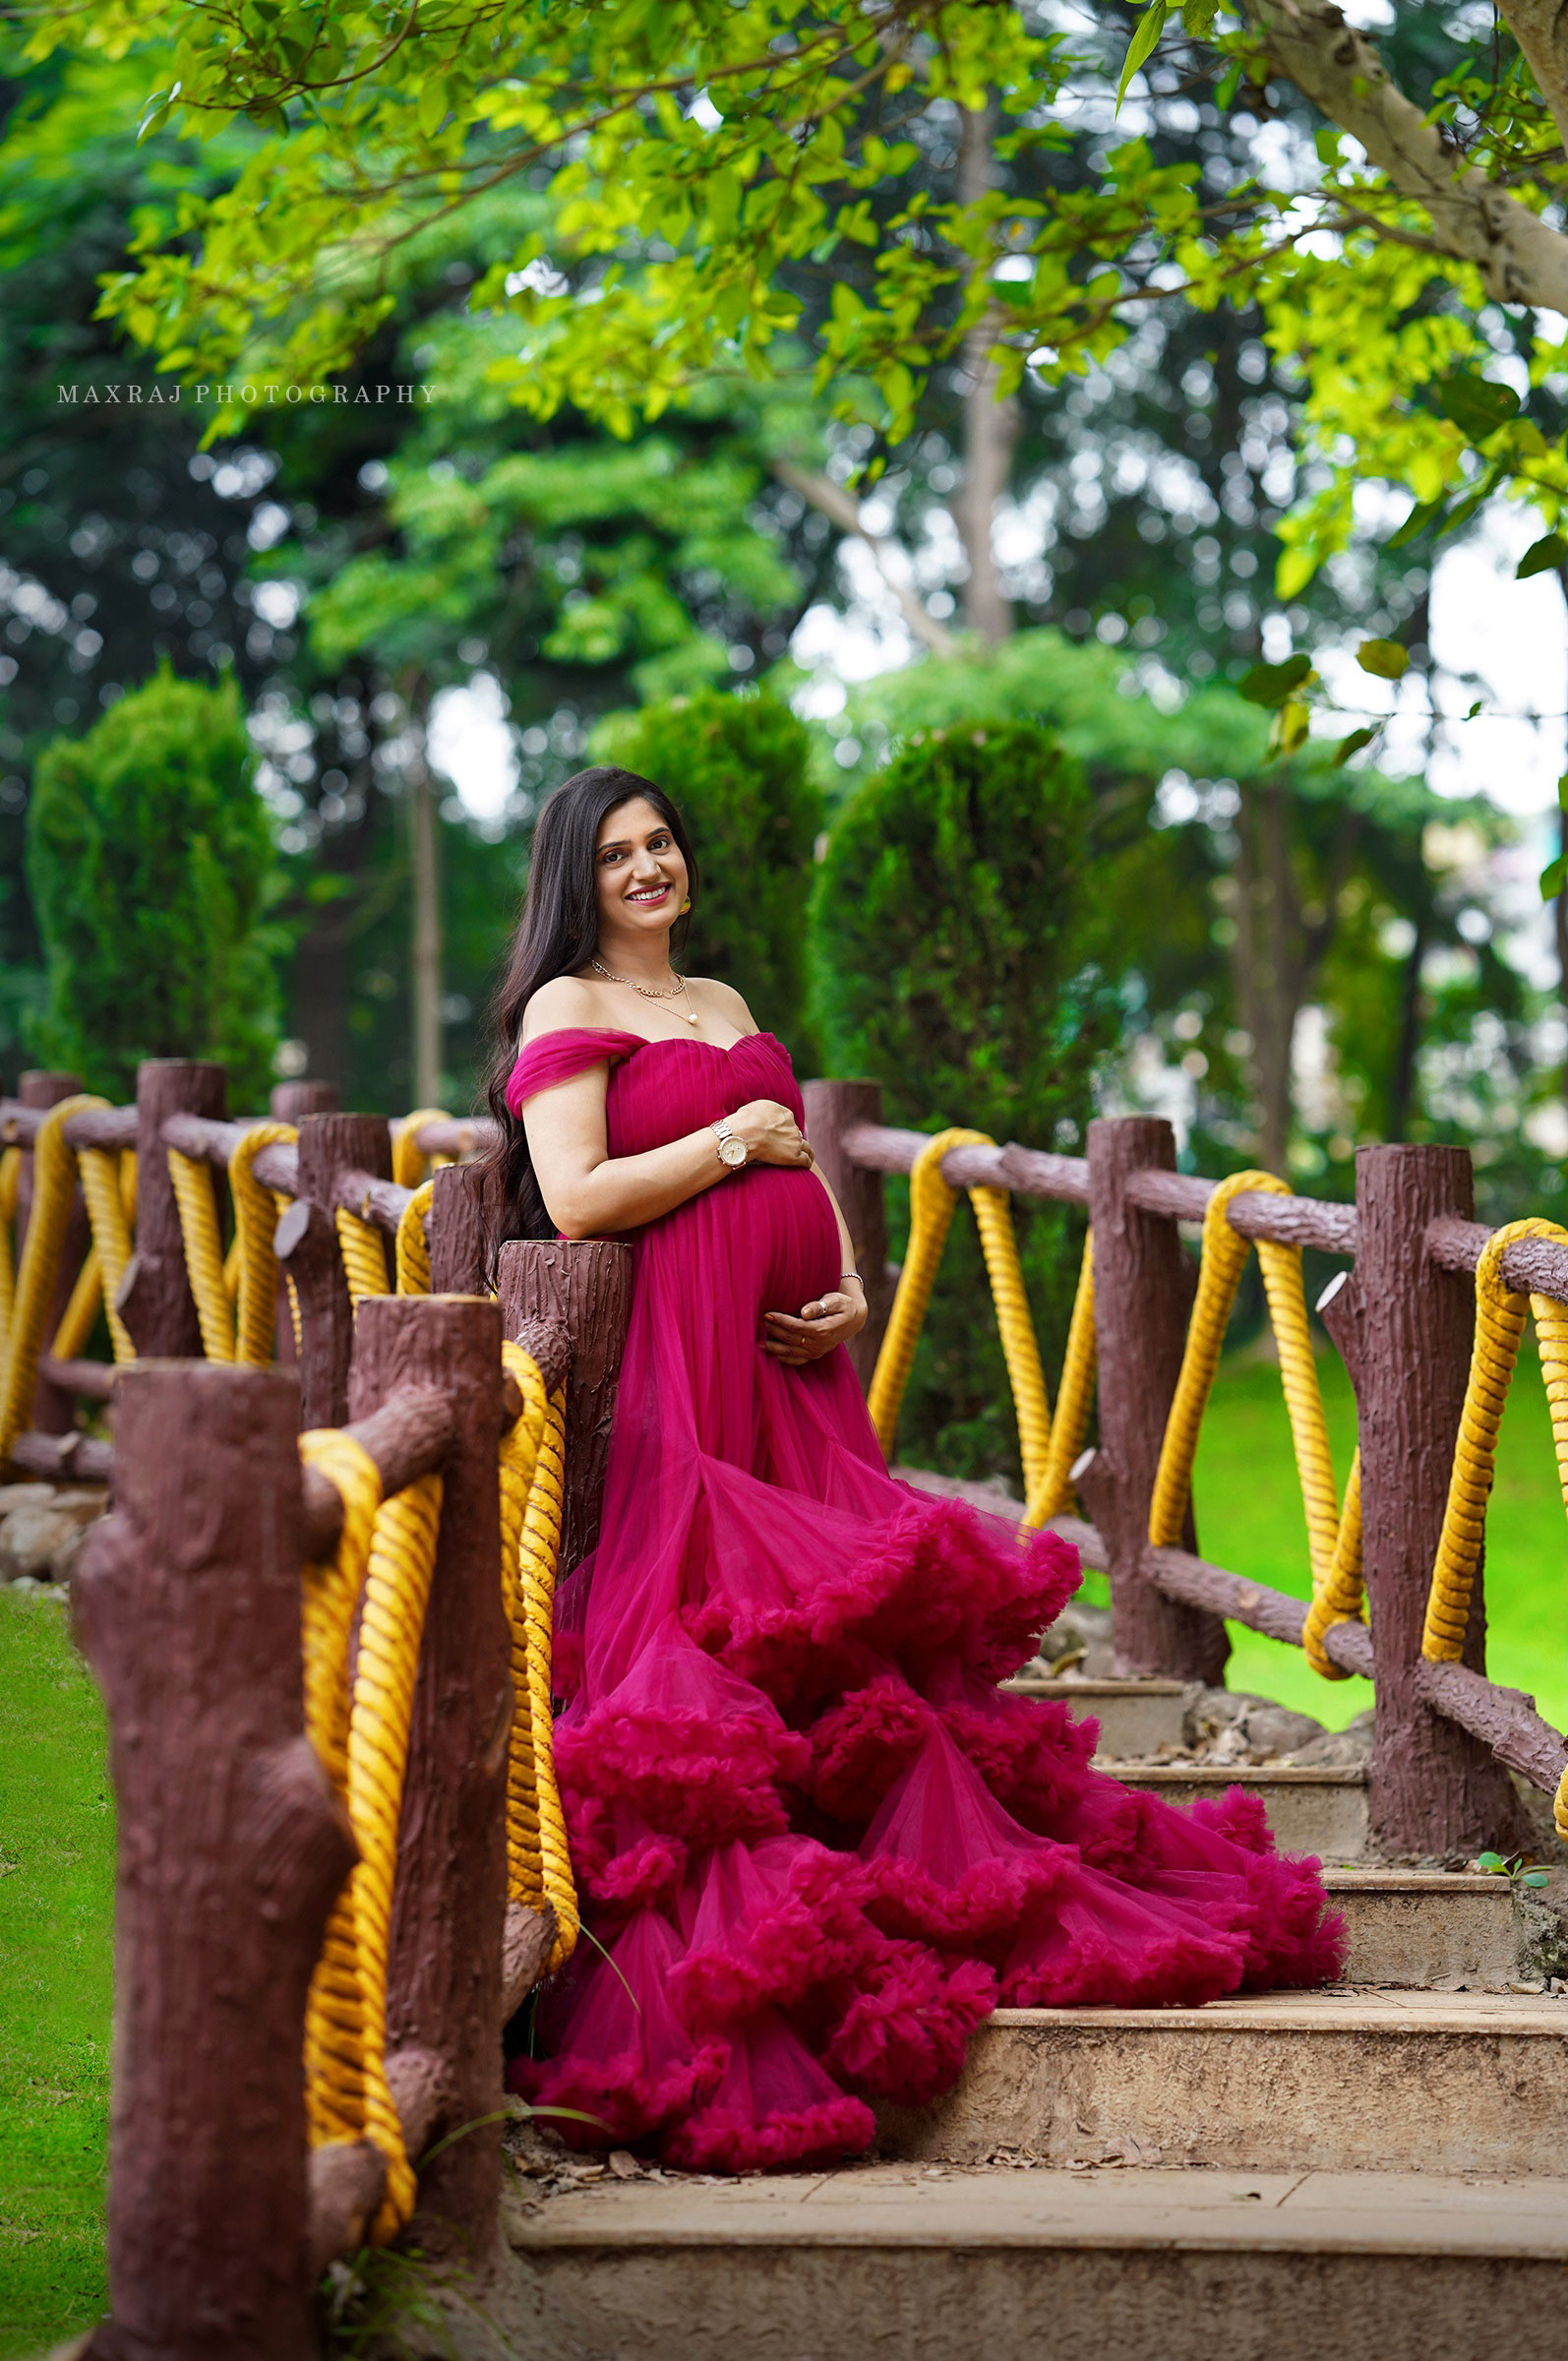 maternity photographer in pune, maternity photoshoot poses, maternity photoshoot ideas, maternity photoshoot in red dress